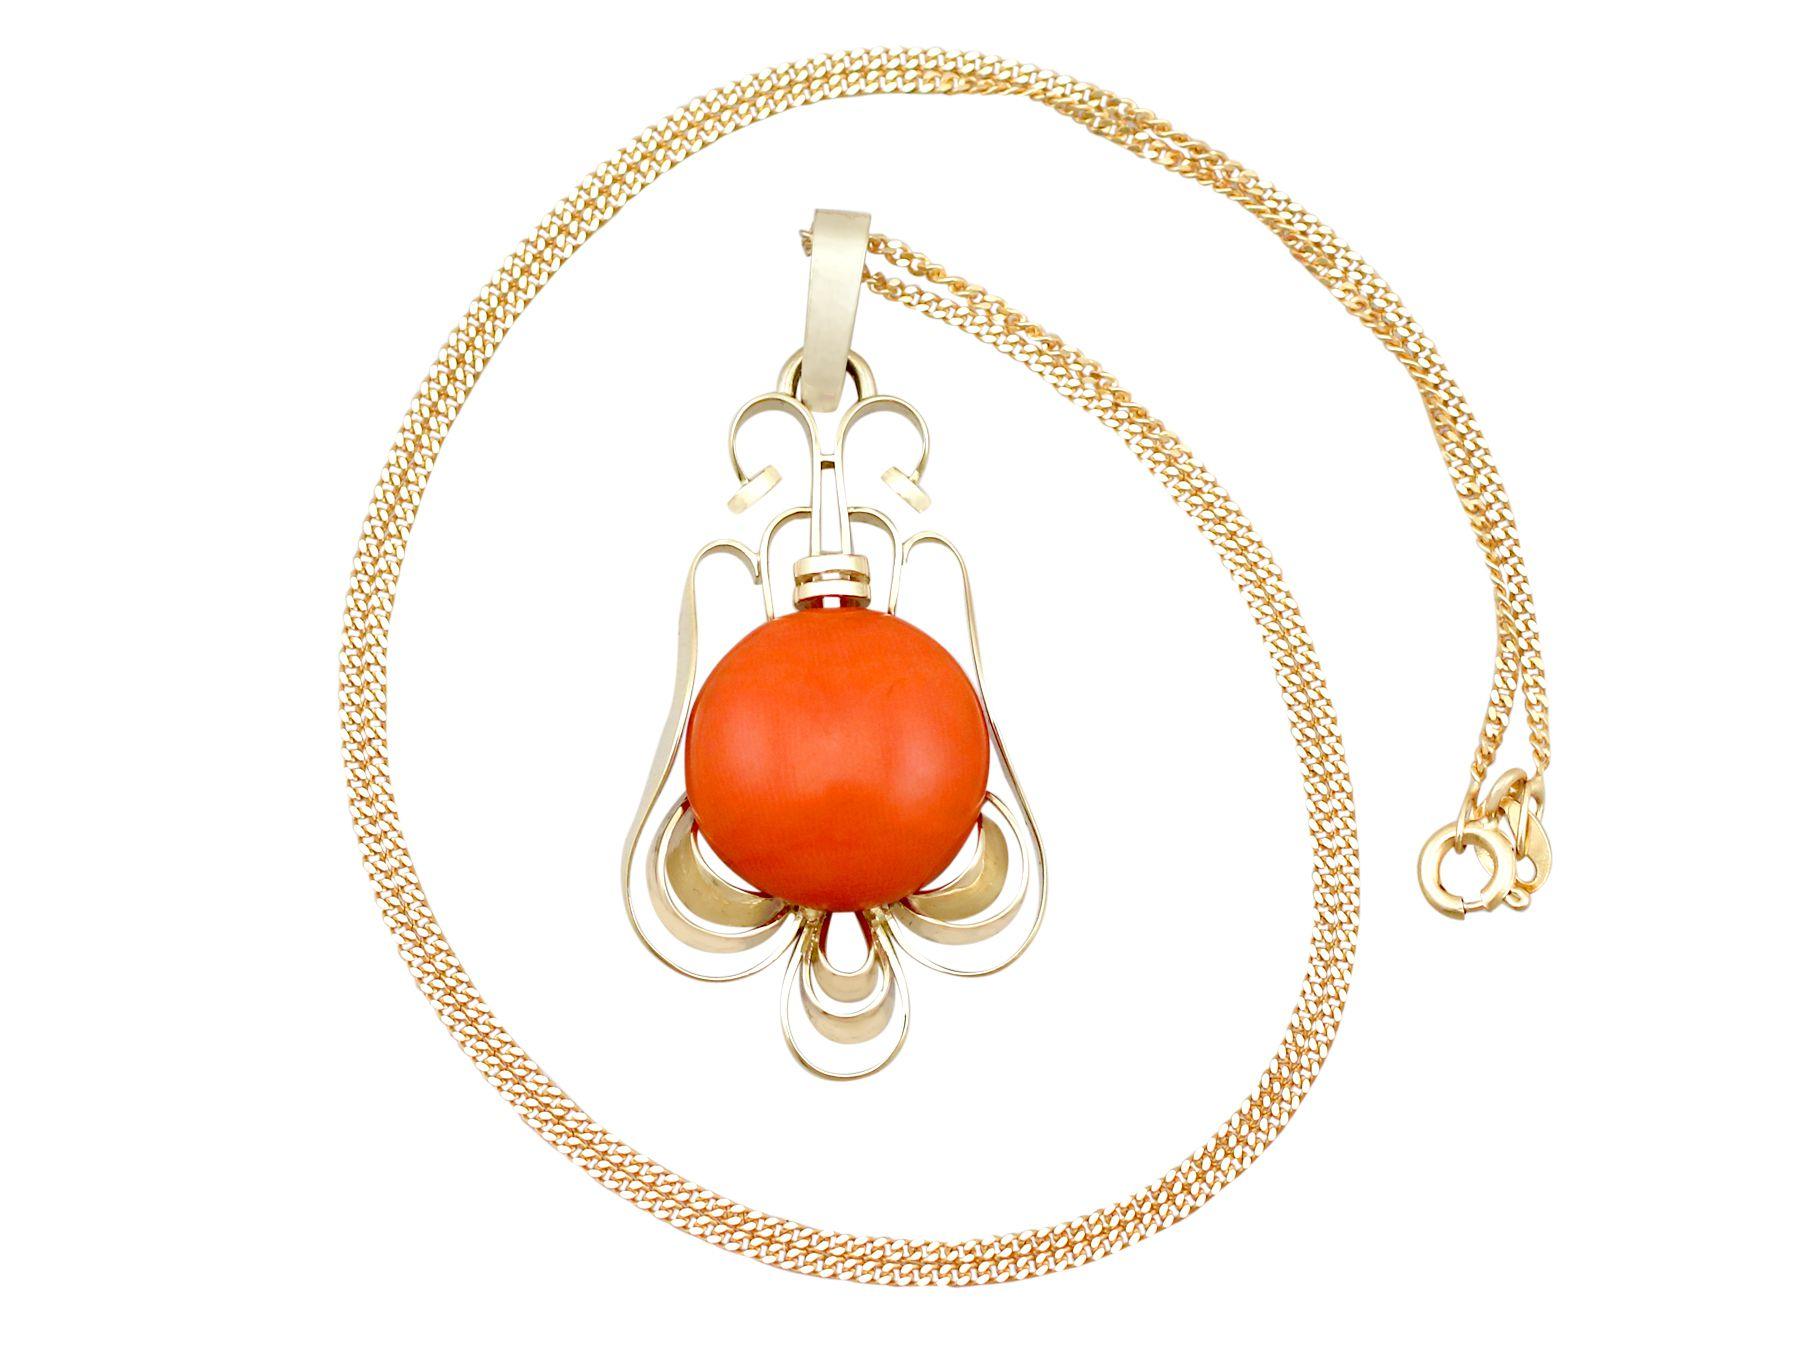 An impressive vintage Art Deco 7.47 carat coral and 14 karat yellow gold pendant and chain; part of our diverse vintage jewelry collections.

This stunning, fine and impressive vintage coral pendant has been crafted in 14k yellow gold.

The pierced